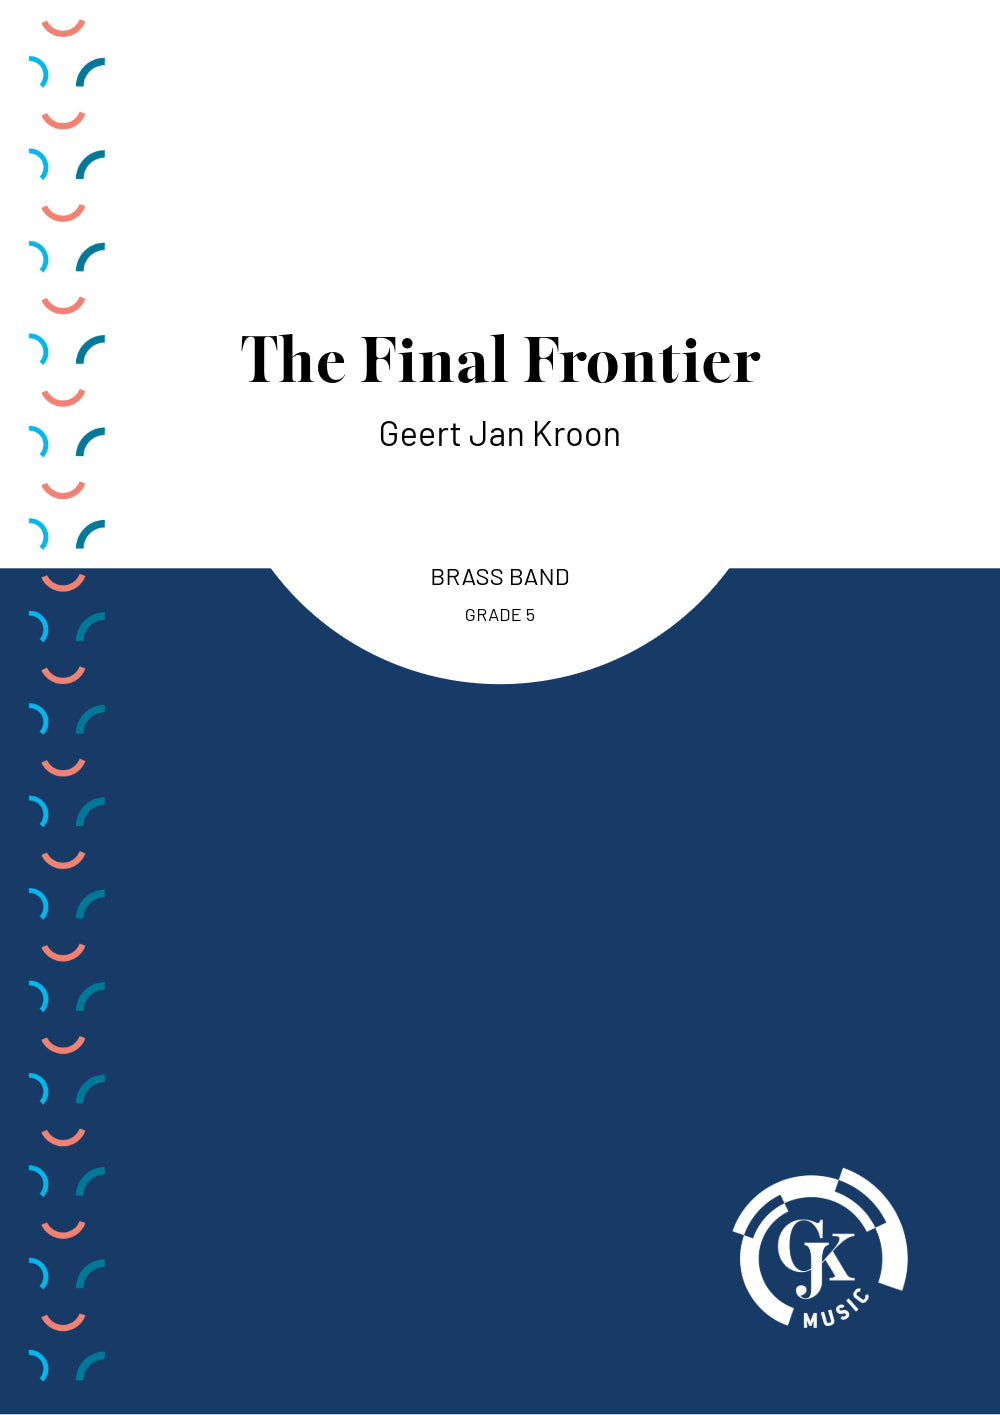 The Final Frontier (Score) - Brass Band